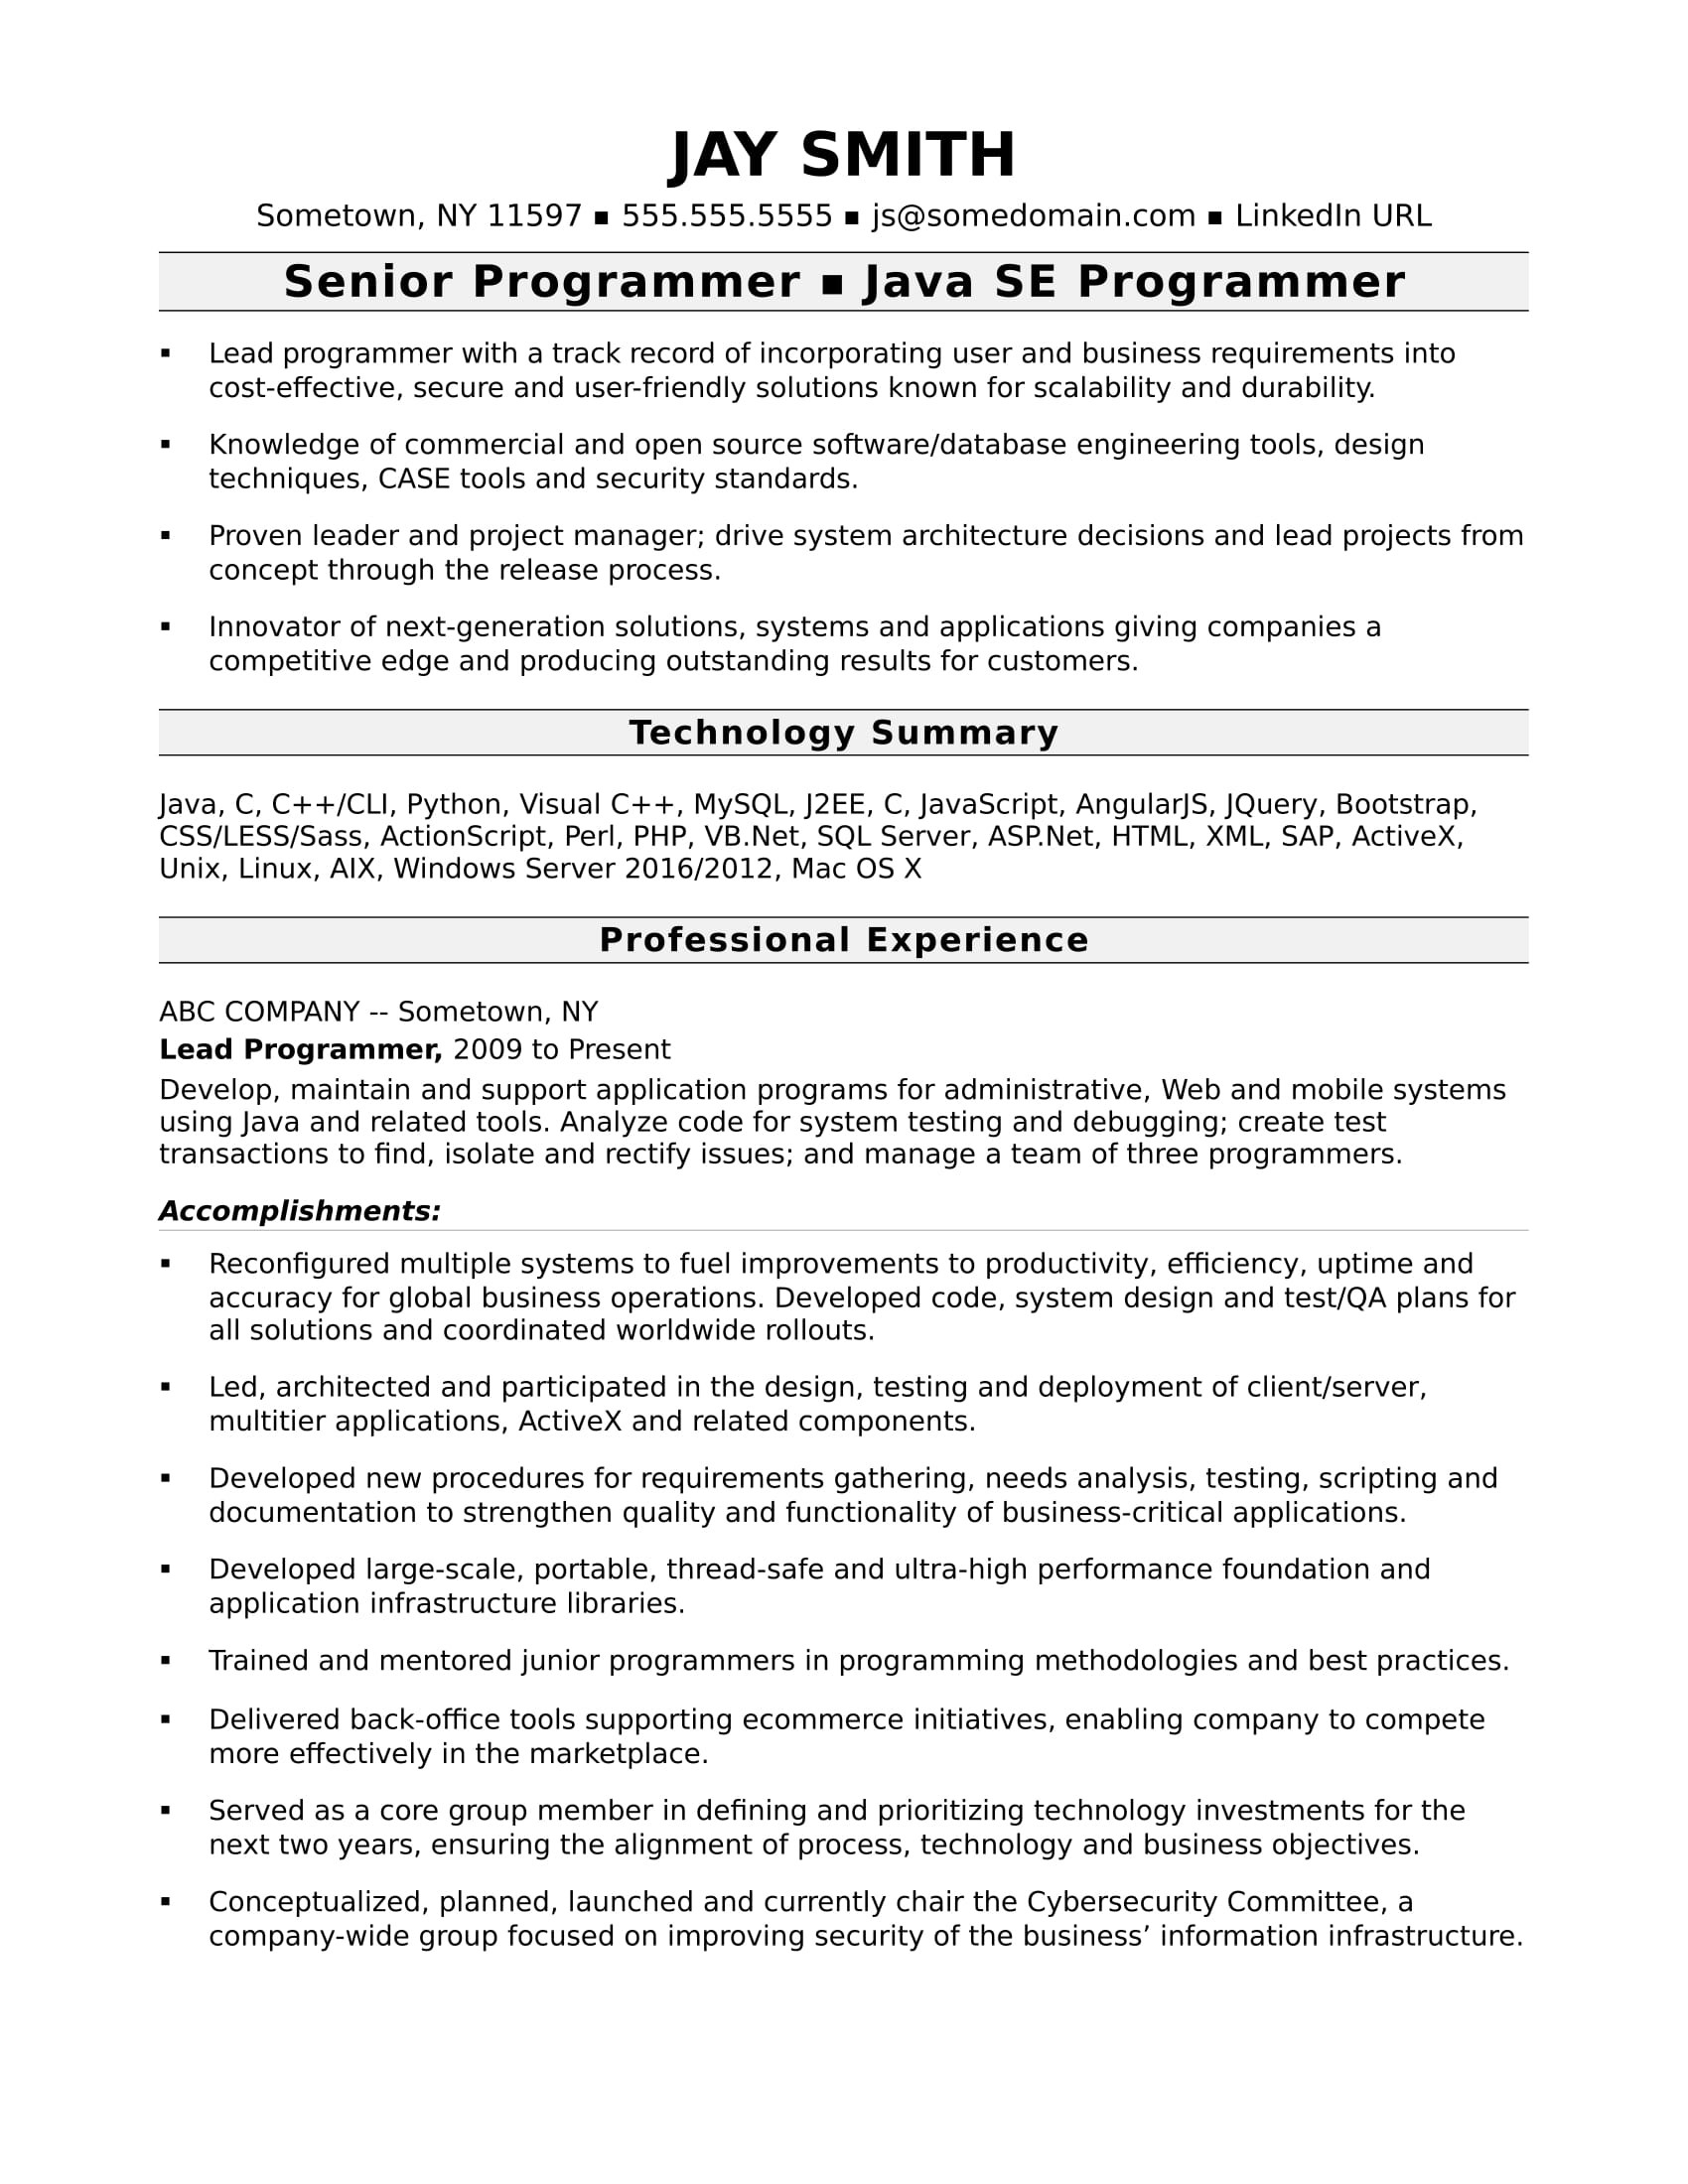 Sample Resume Objectives for Experienced It Professionals Programmer Resume Template Monster.com